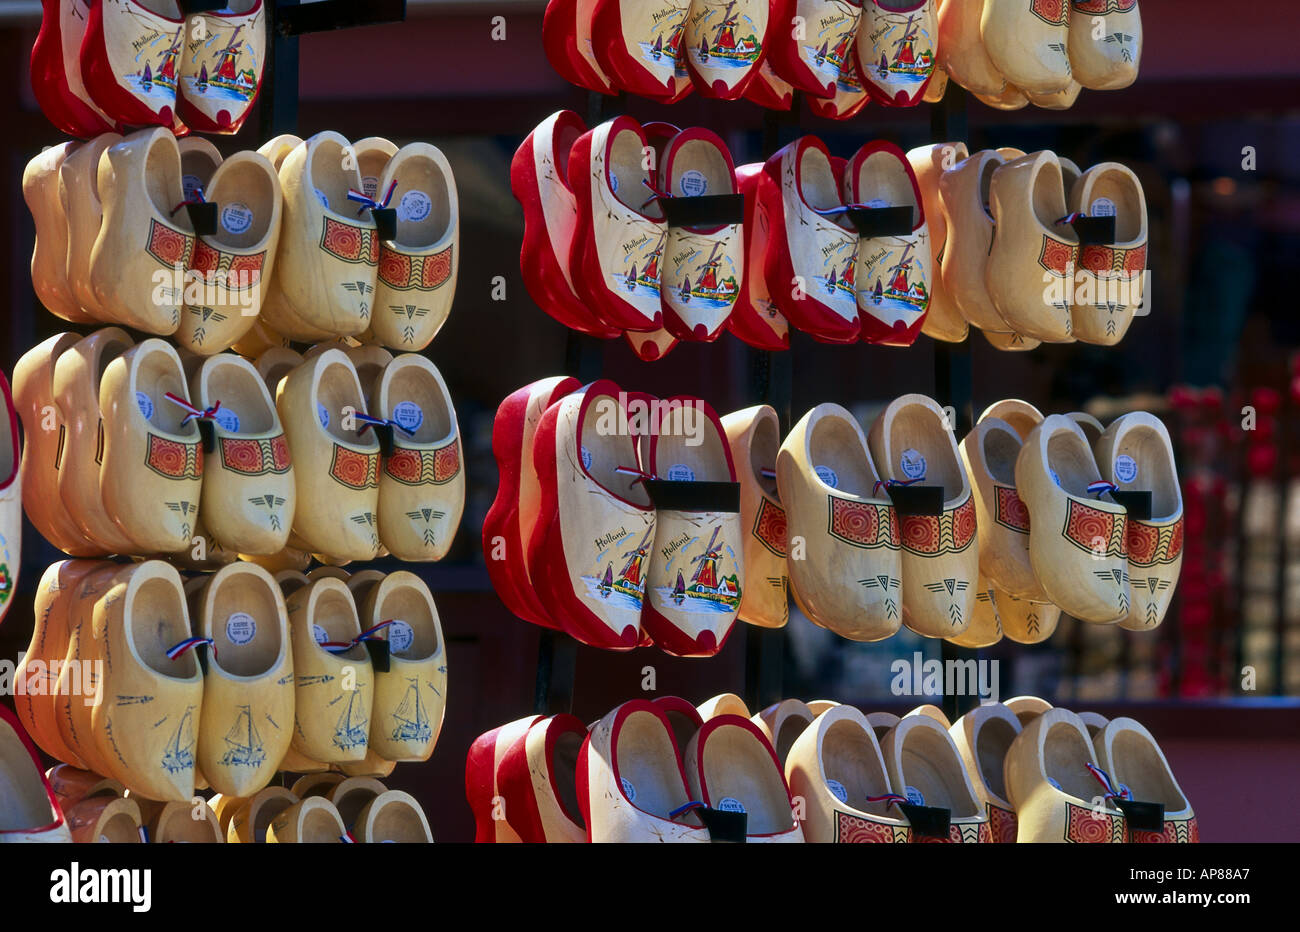 Clogs hanging on wall at souvenirs store, Den Haag, The Hague, Netherlands Stock Photo